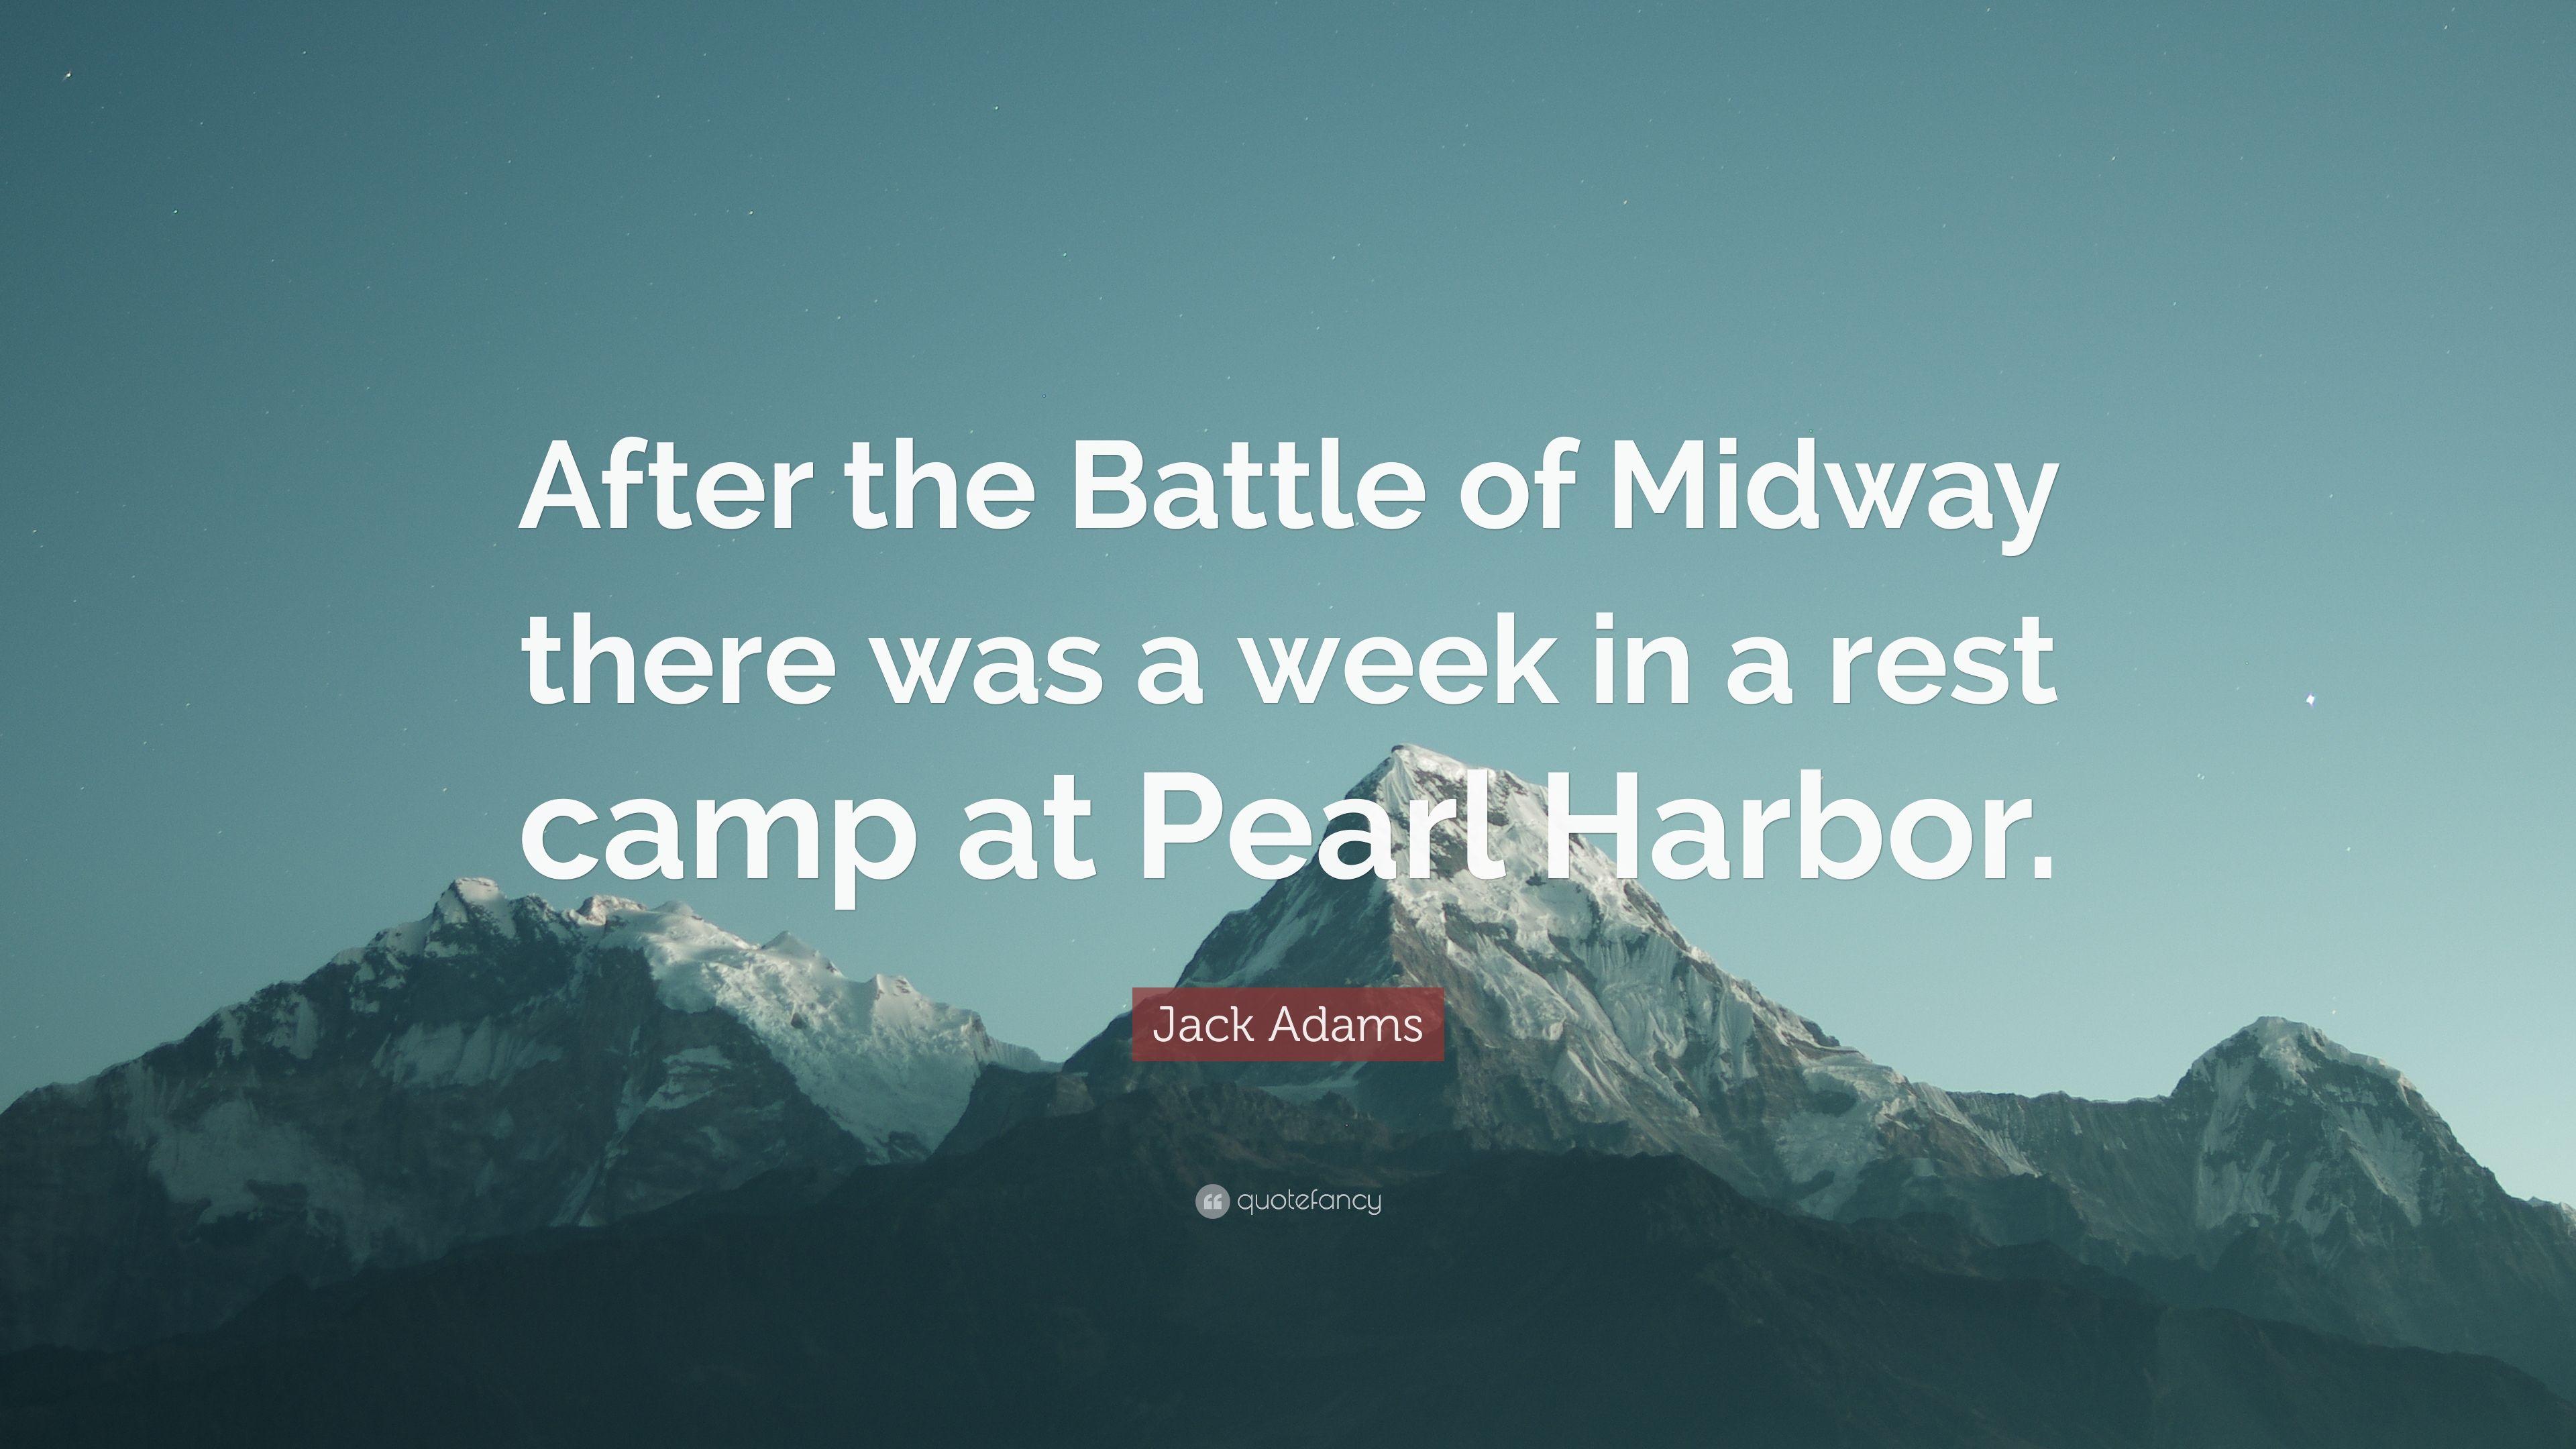 Jack Adams Quote: “After the Battle of Midway there was a week in a